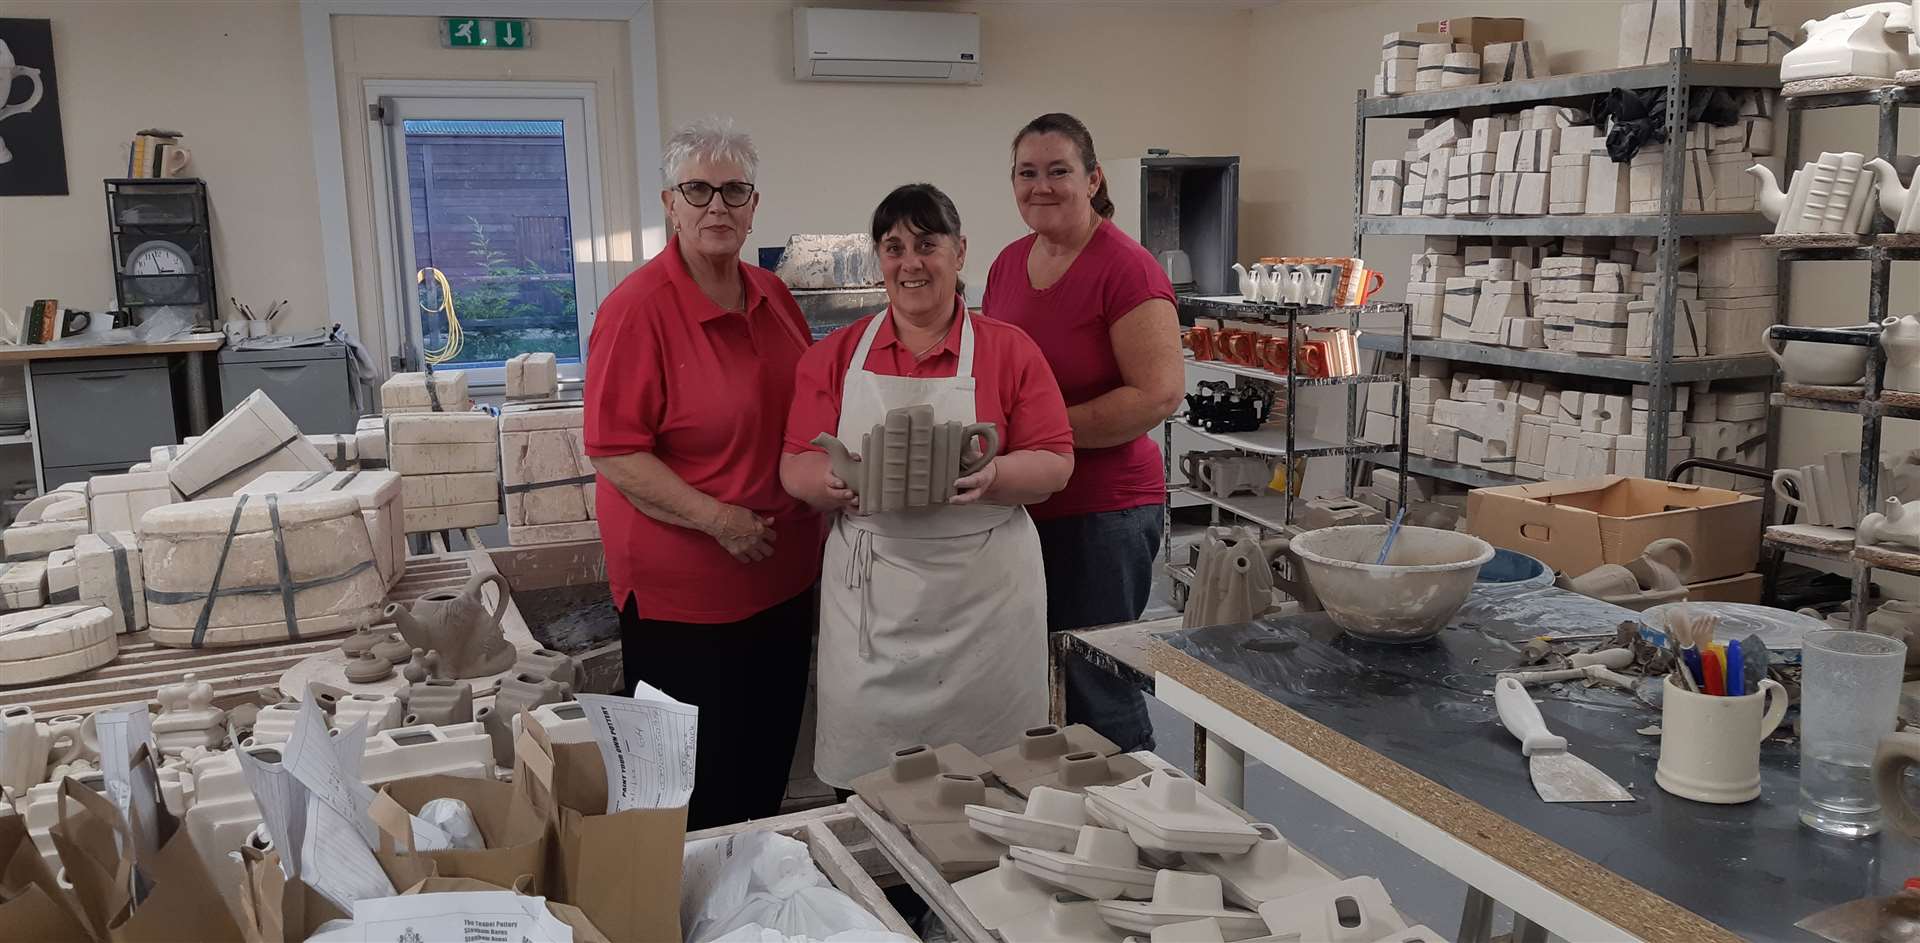 Pottery staff (L-R) Carol Bridges, Jil Davey and Tracey Maskell in the pottery at Carters of Suffolk